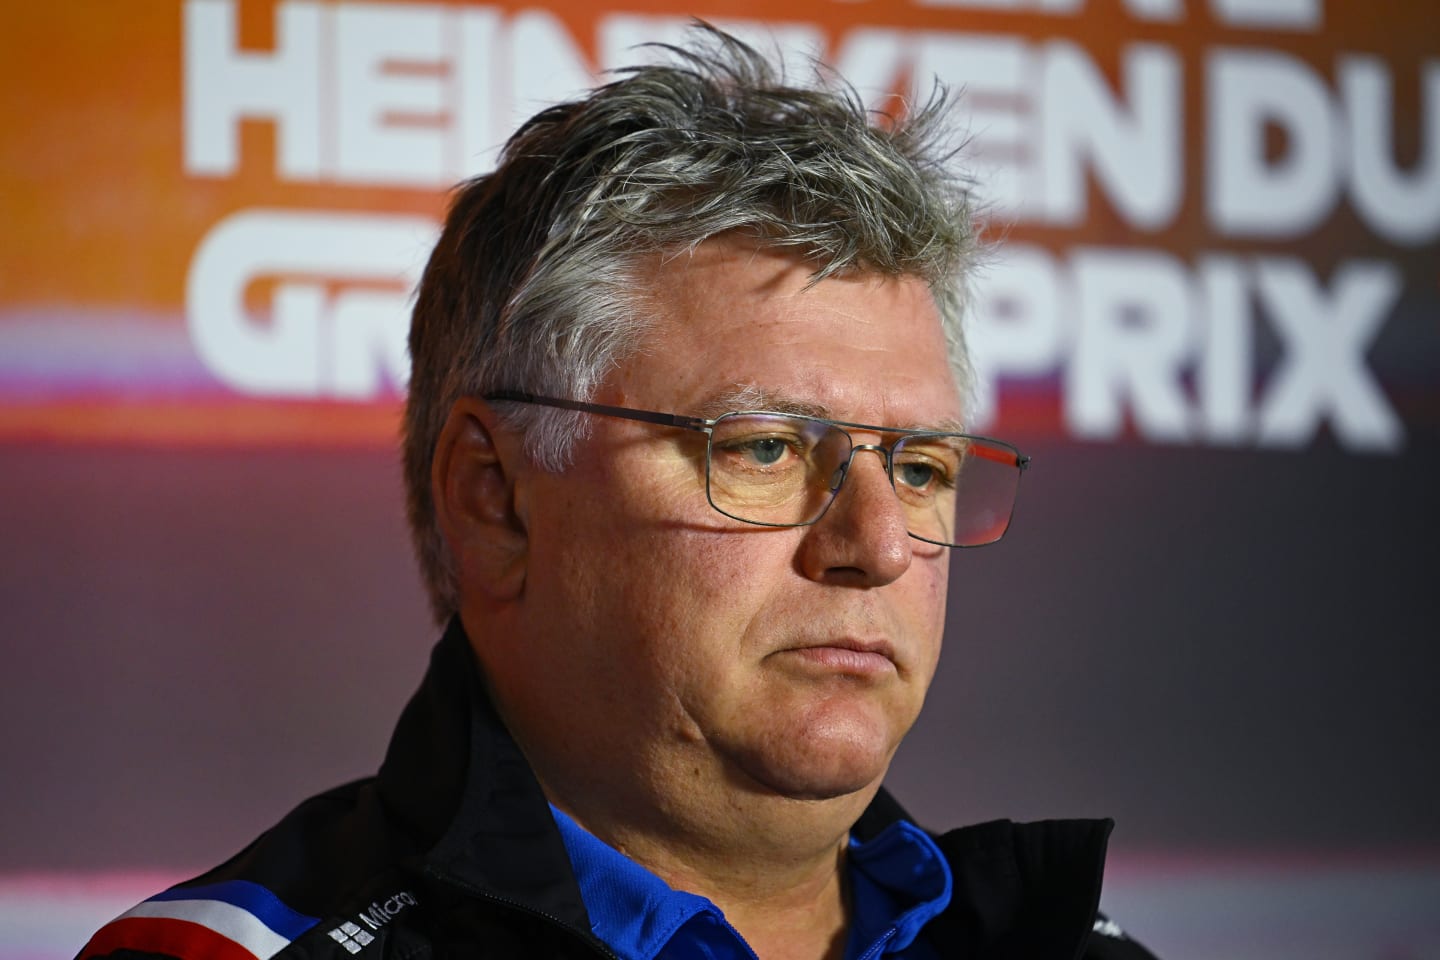 ZANDVOORT, NETHERLANDS - SEPTEMBER 03: Otmar Szafnauer, Team Principal of Alpine F1 attends the Team Principals Press Conference prior to final practice ahead of the F1 Grand Prix of The Netherlands at Circuit Zandvoort on September 03, 2022 in Zandvoort, Netherlands. (Photo by Clive Mason/Getty Images)